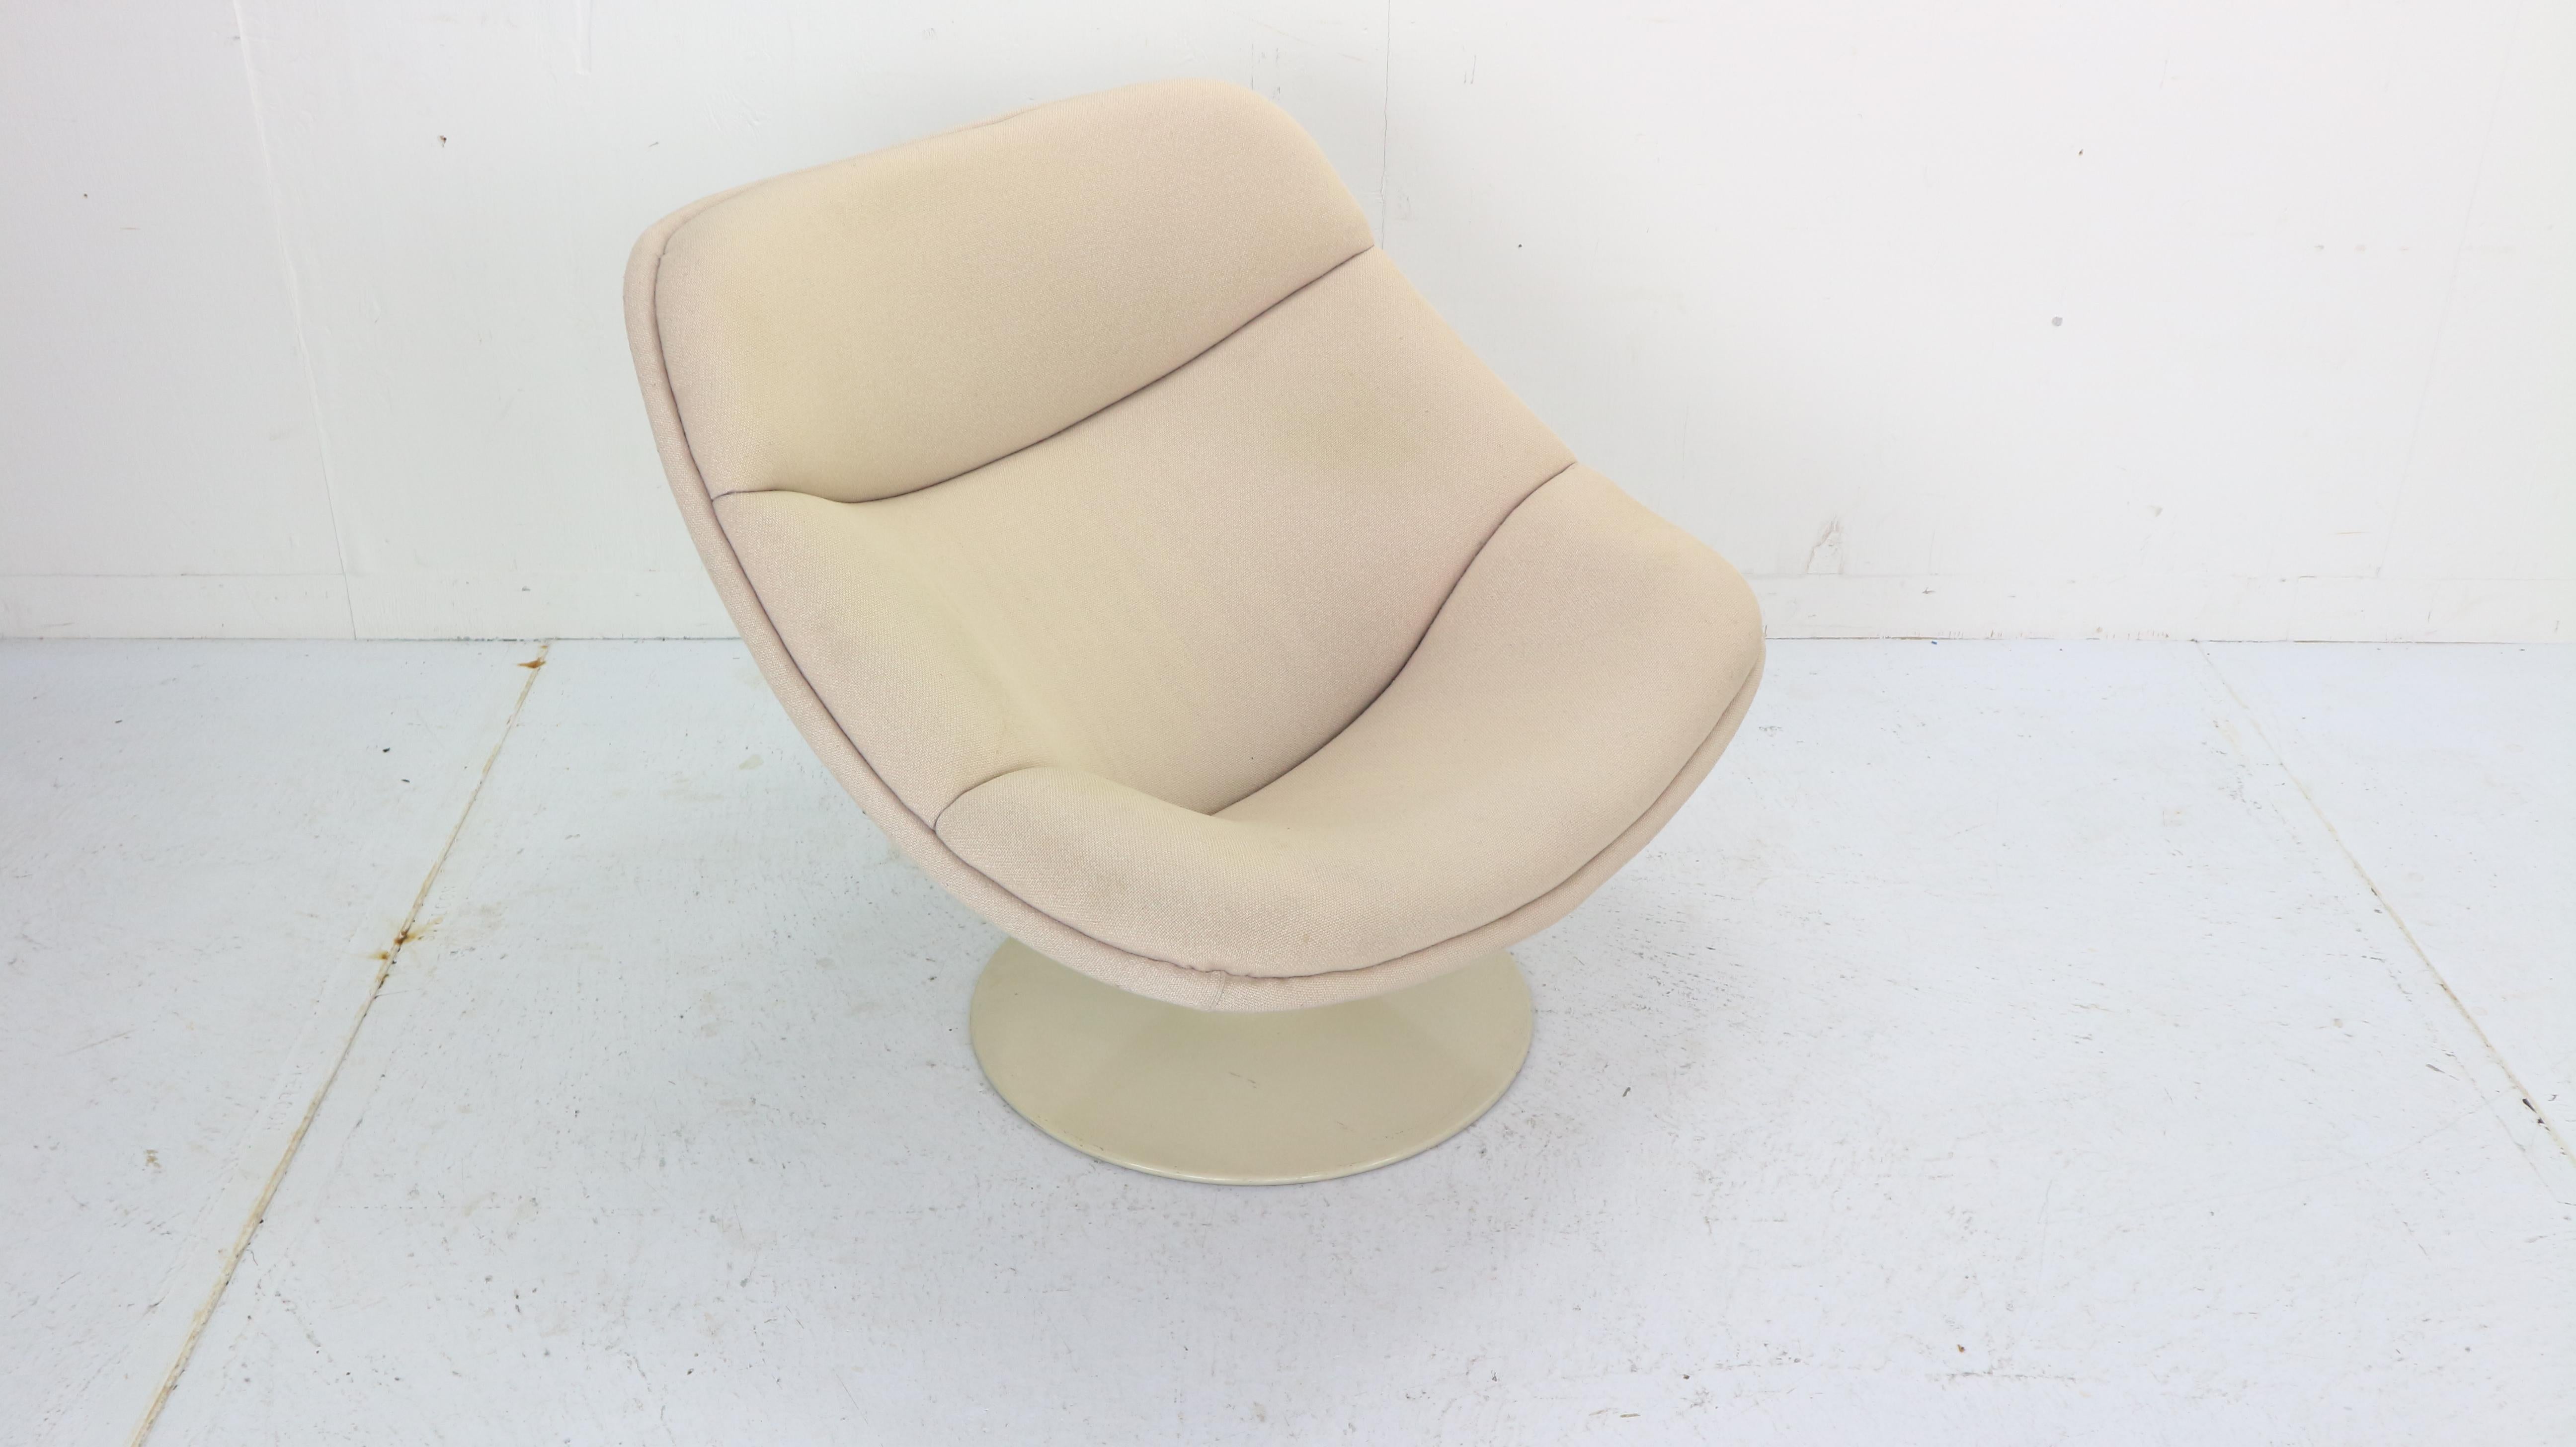 Mid-Century Modern Oyster Lounge Chair By Pierre Paulin For Artifort #557 Model, 1960s Netherlands 